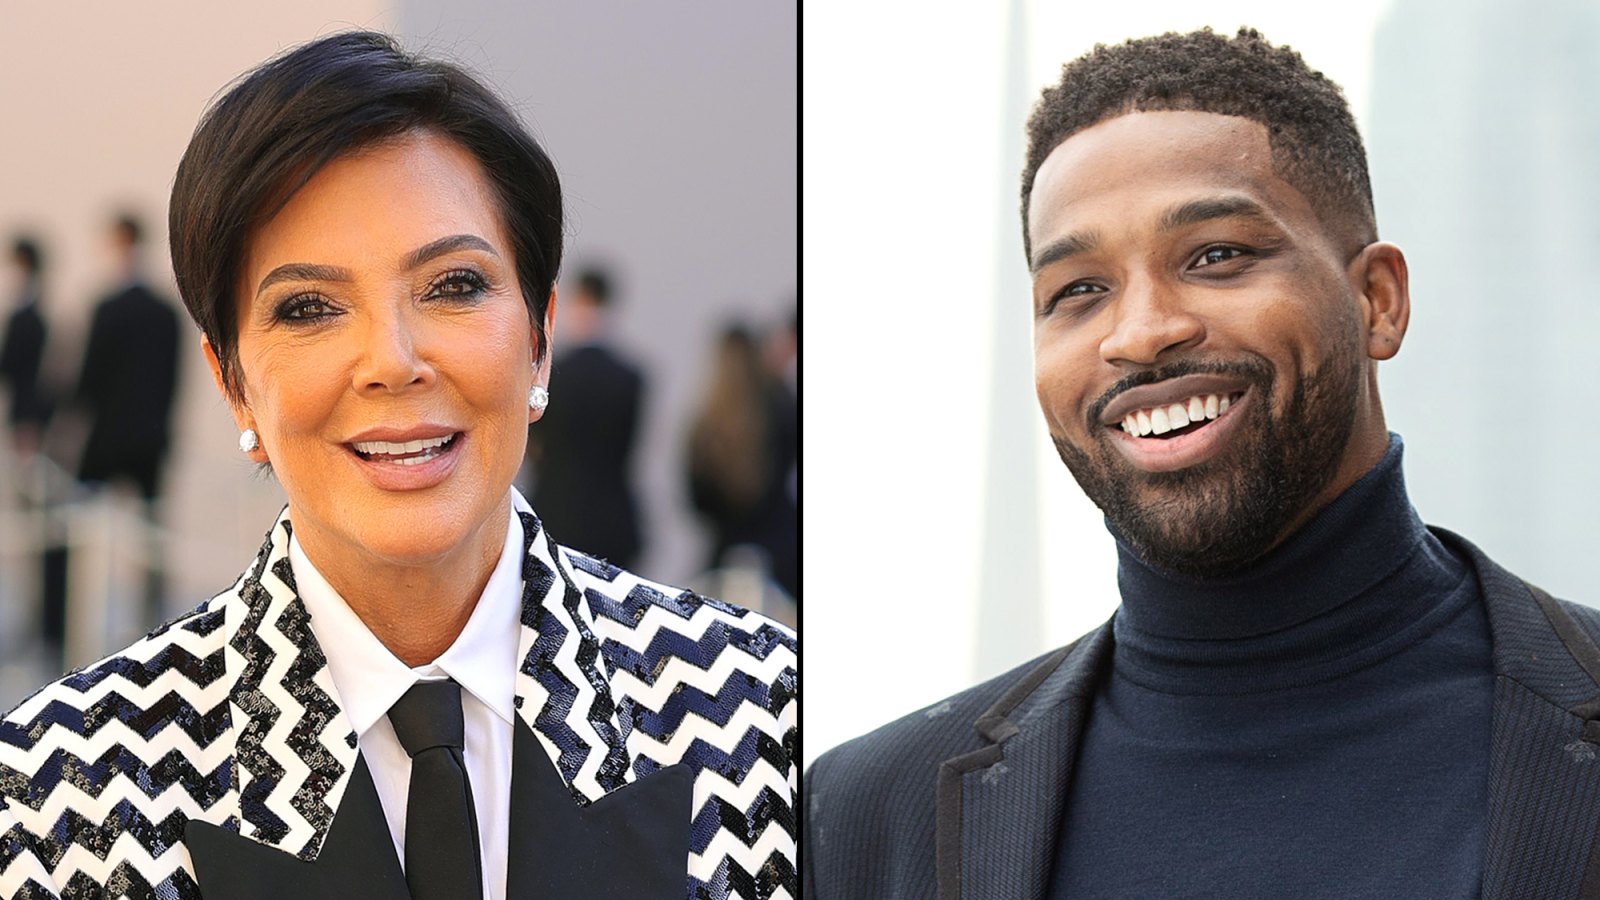 Kris Jenner Continues to Sing Tristan Thompson's Praises While His Role as a Dad Is Questioned Off Screen